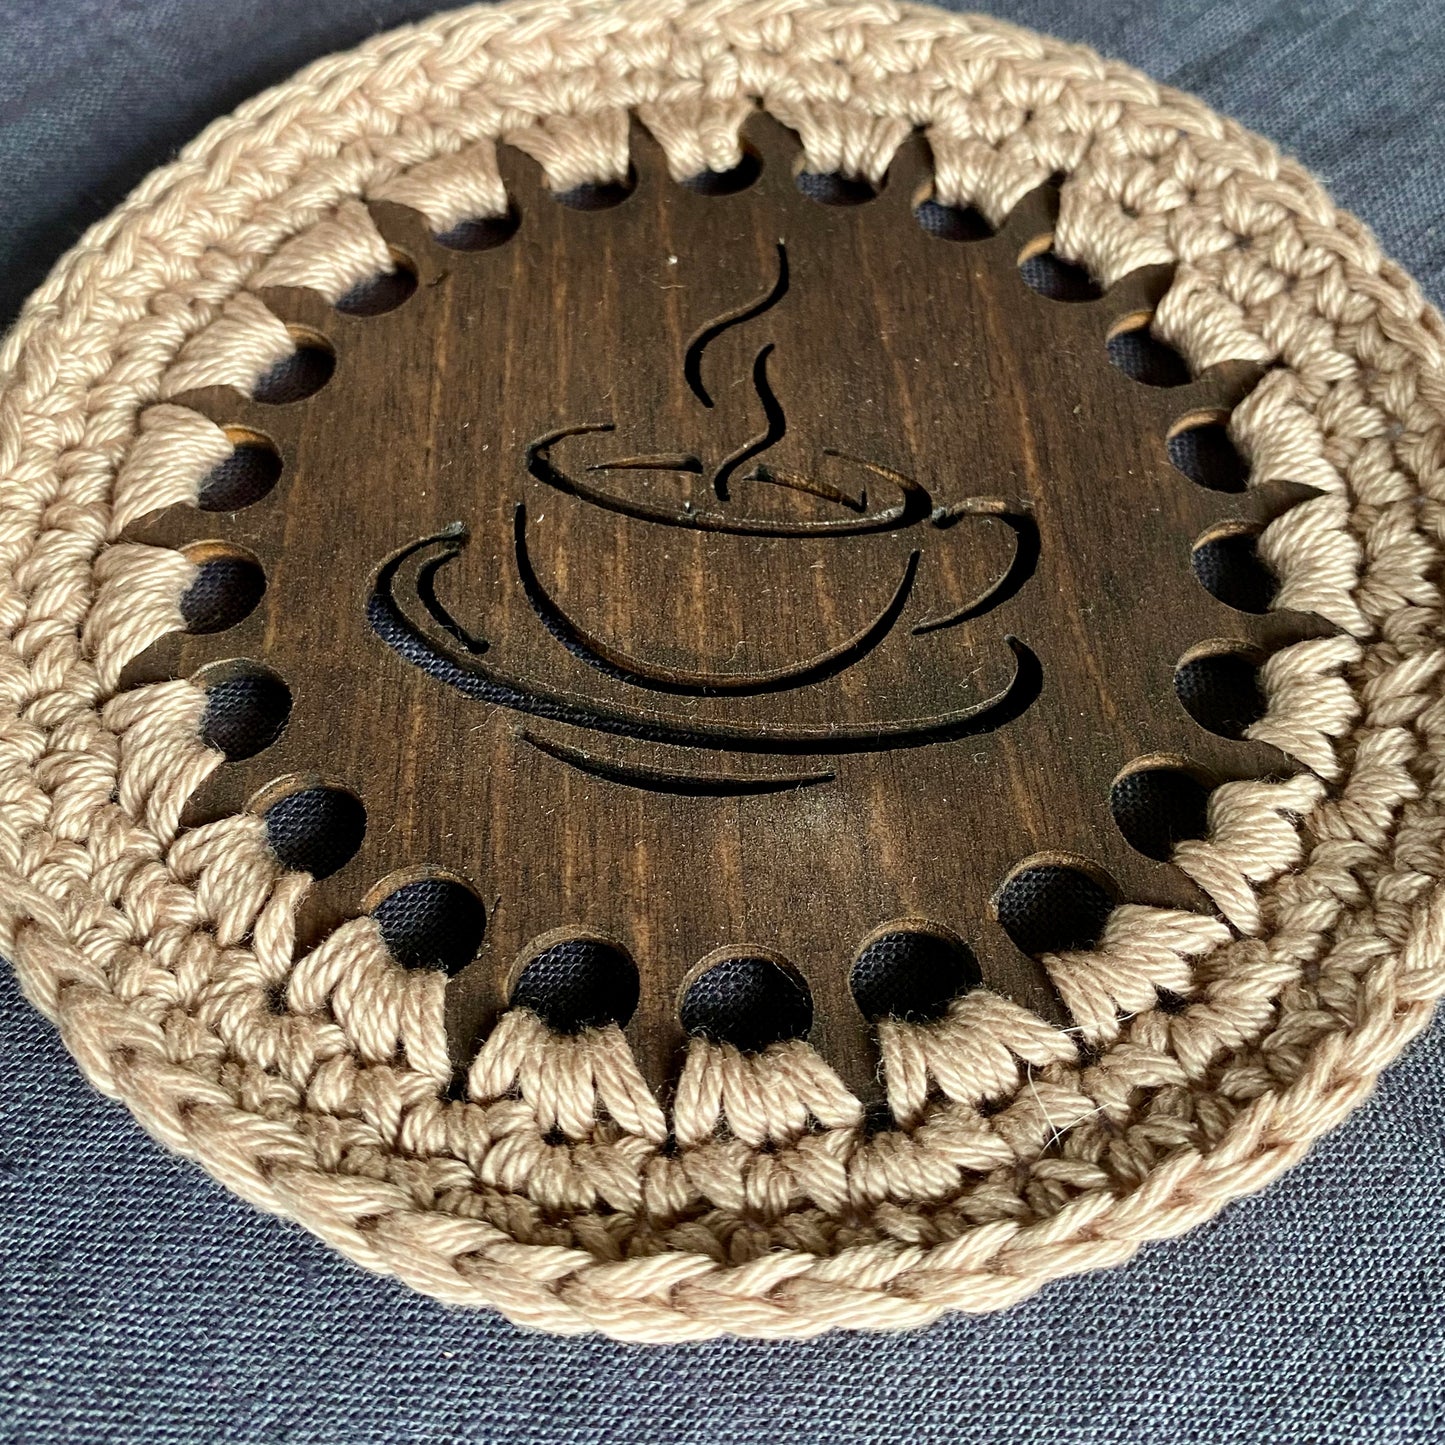 Coasters for Coffee or Tea Lovers